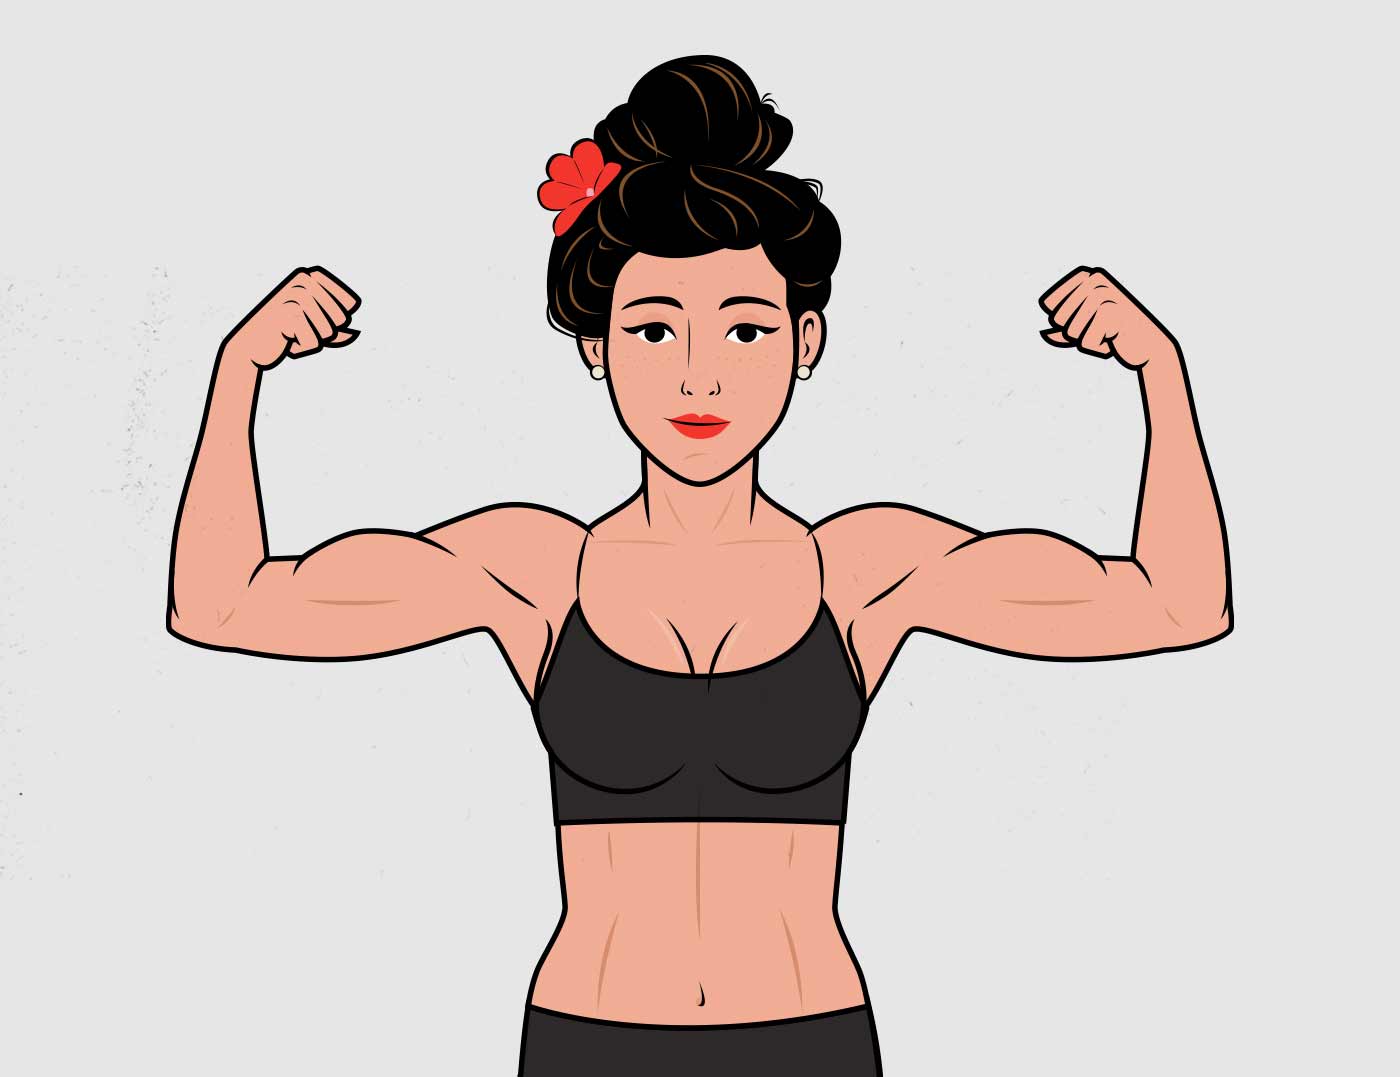 Illustration of a woman flexing her biceps.